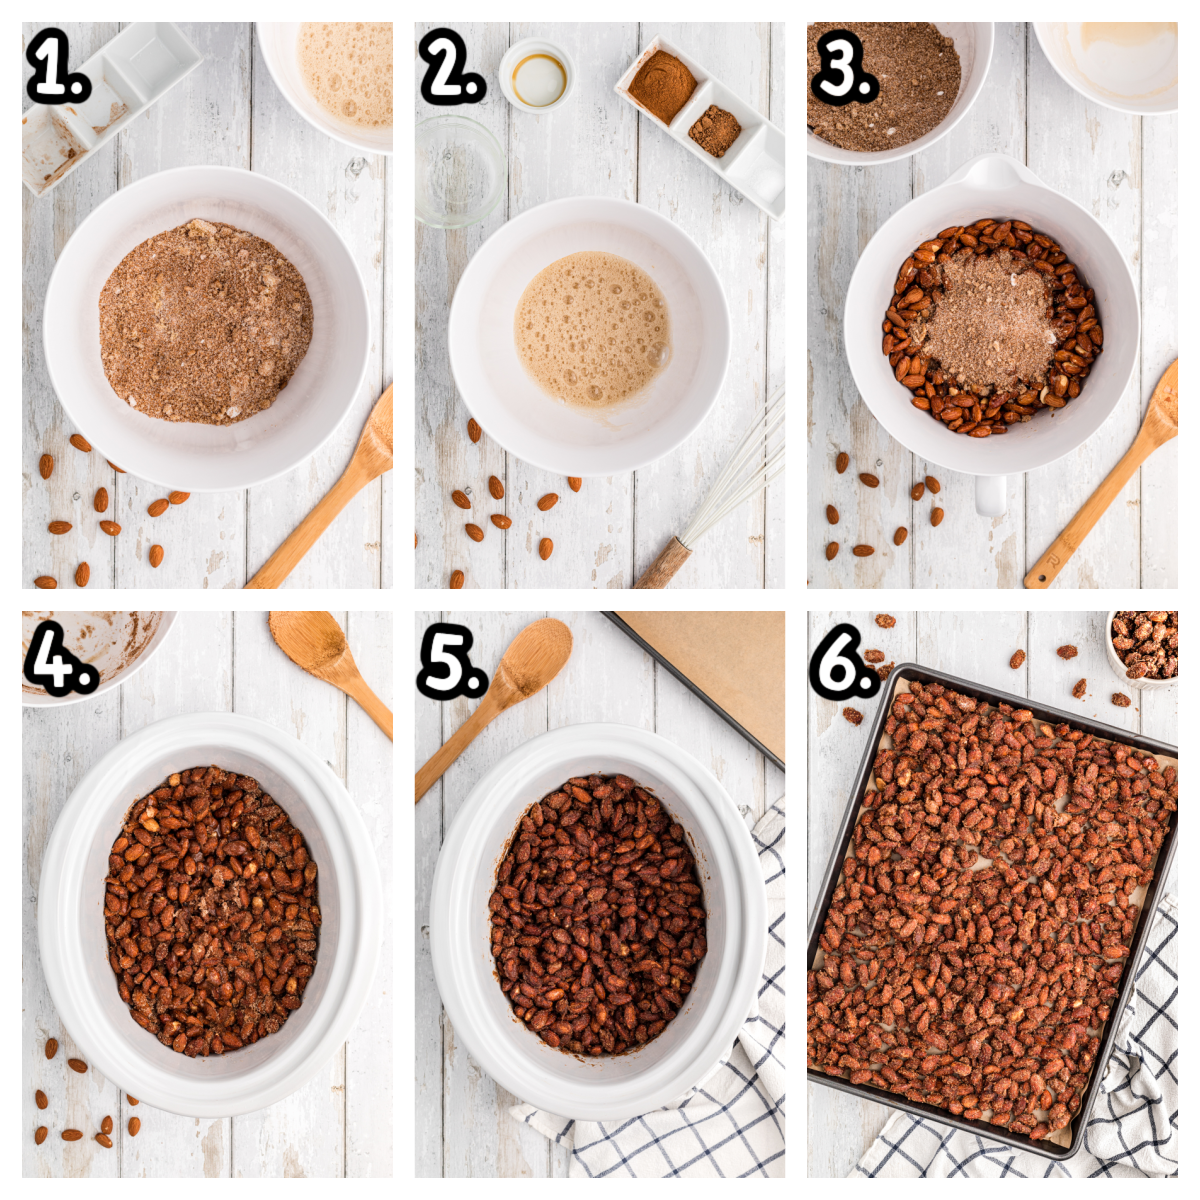 Six images showing how to make cinnamon almonds in a crockpot.